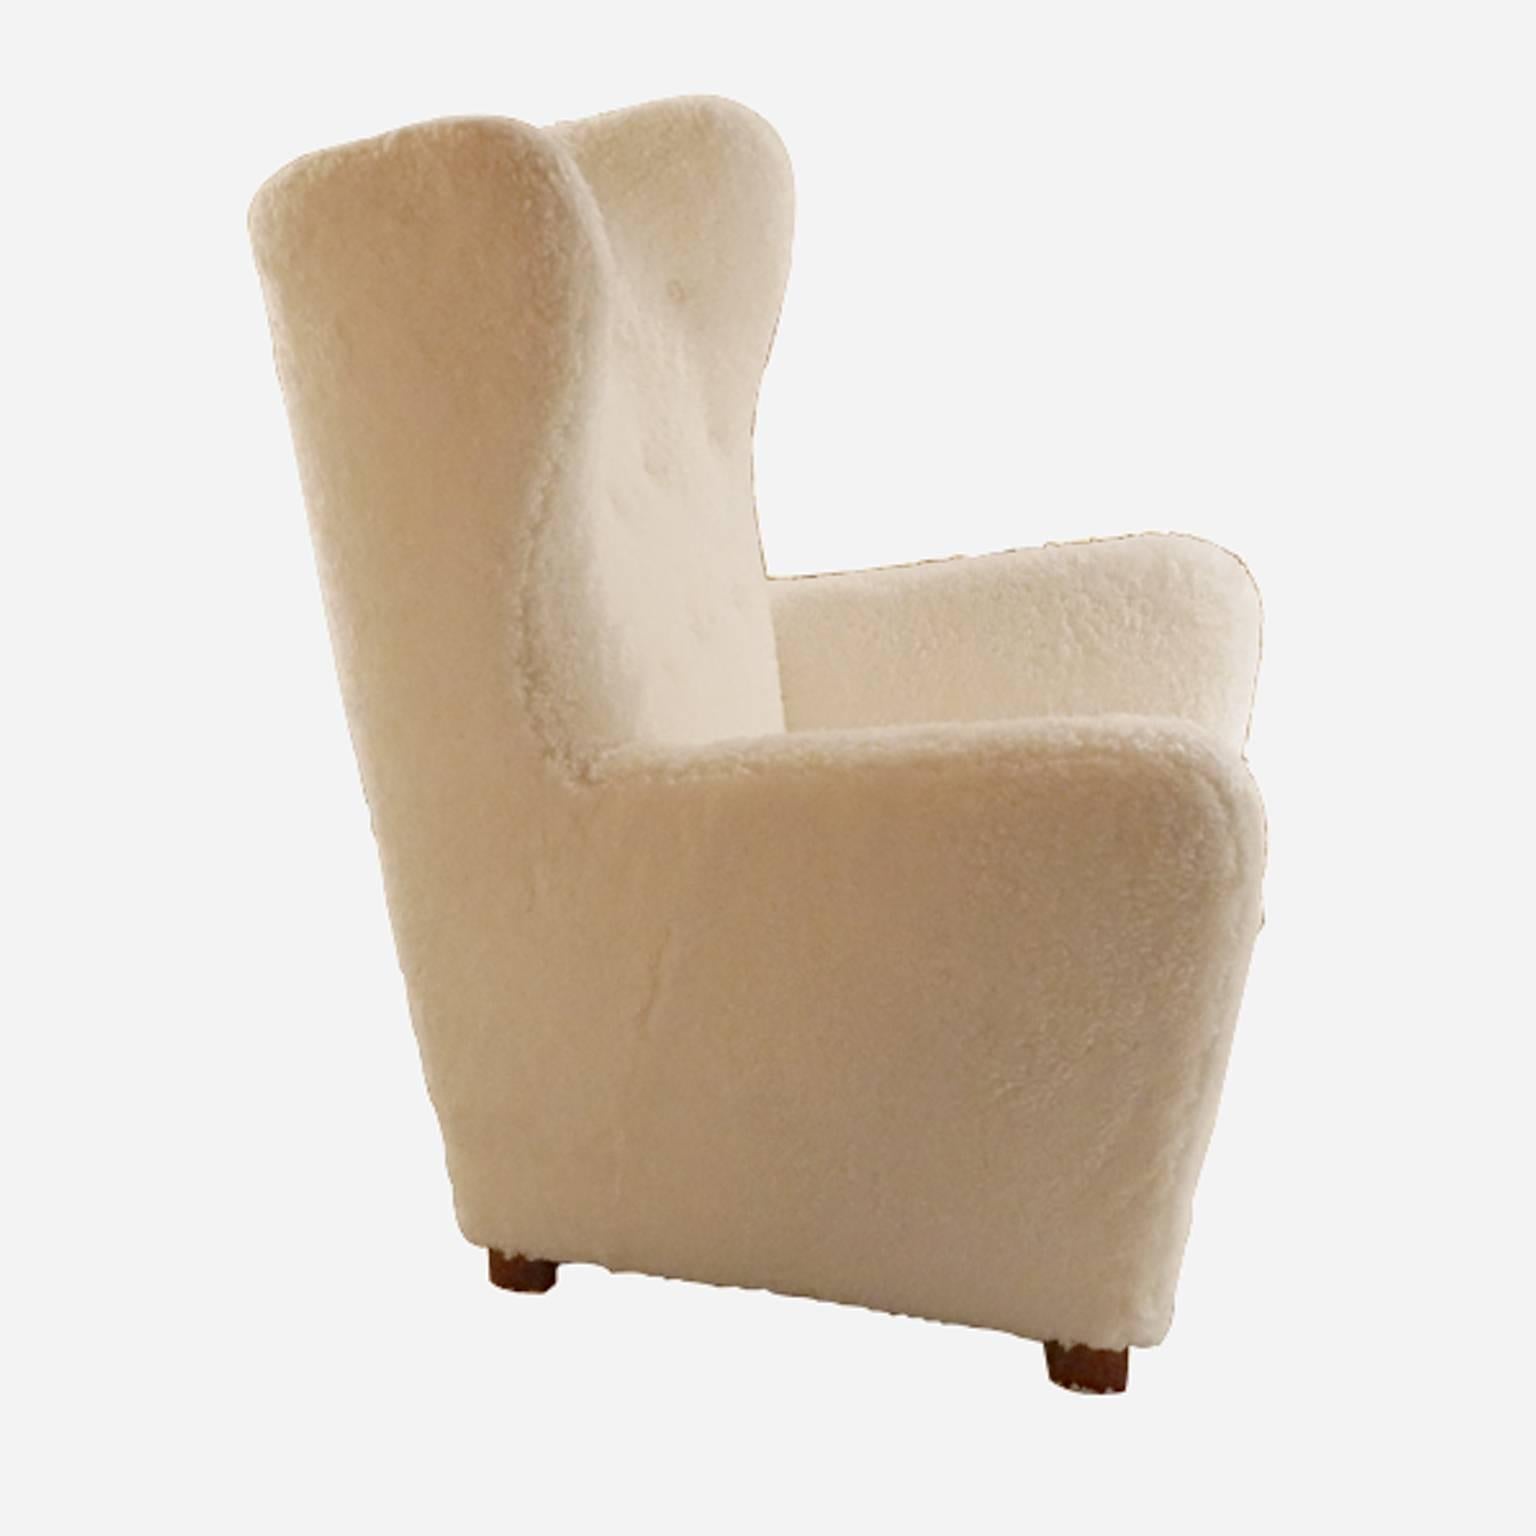 Mid-20th Century One Wingback Lounge Chair by Fritz Hansen, White Sheep Skin, 1940s For Sale